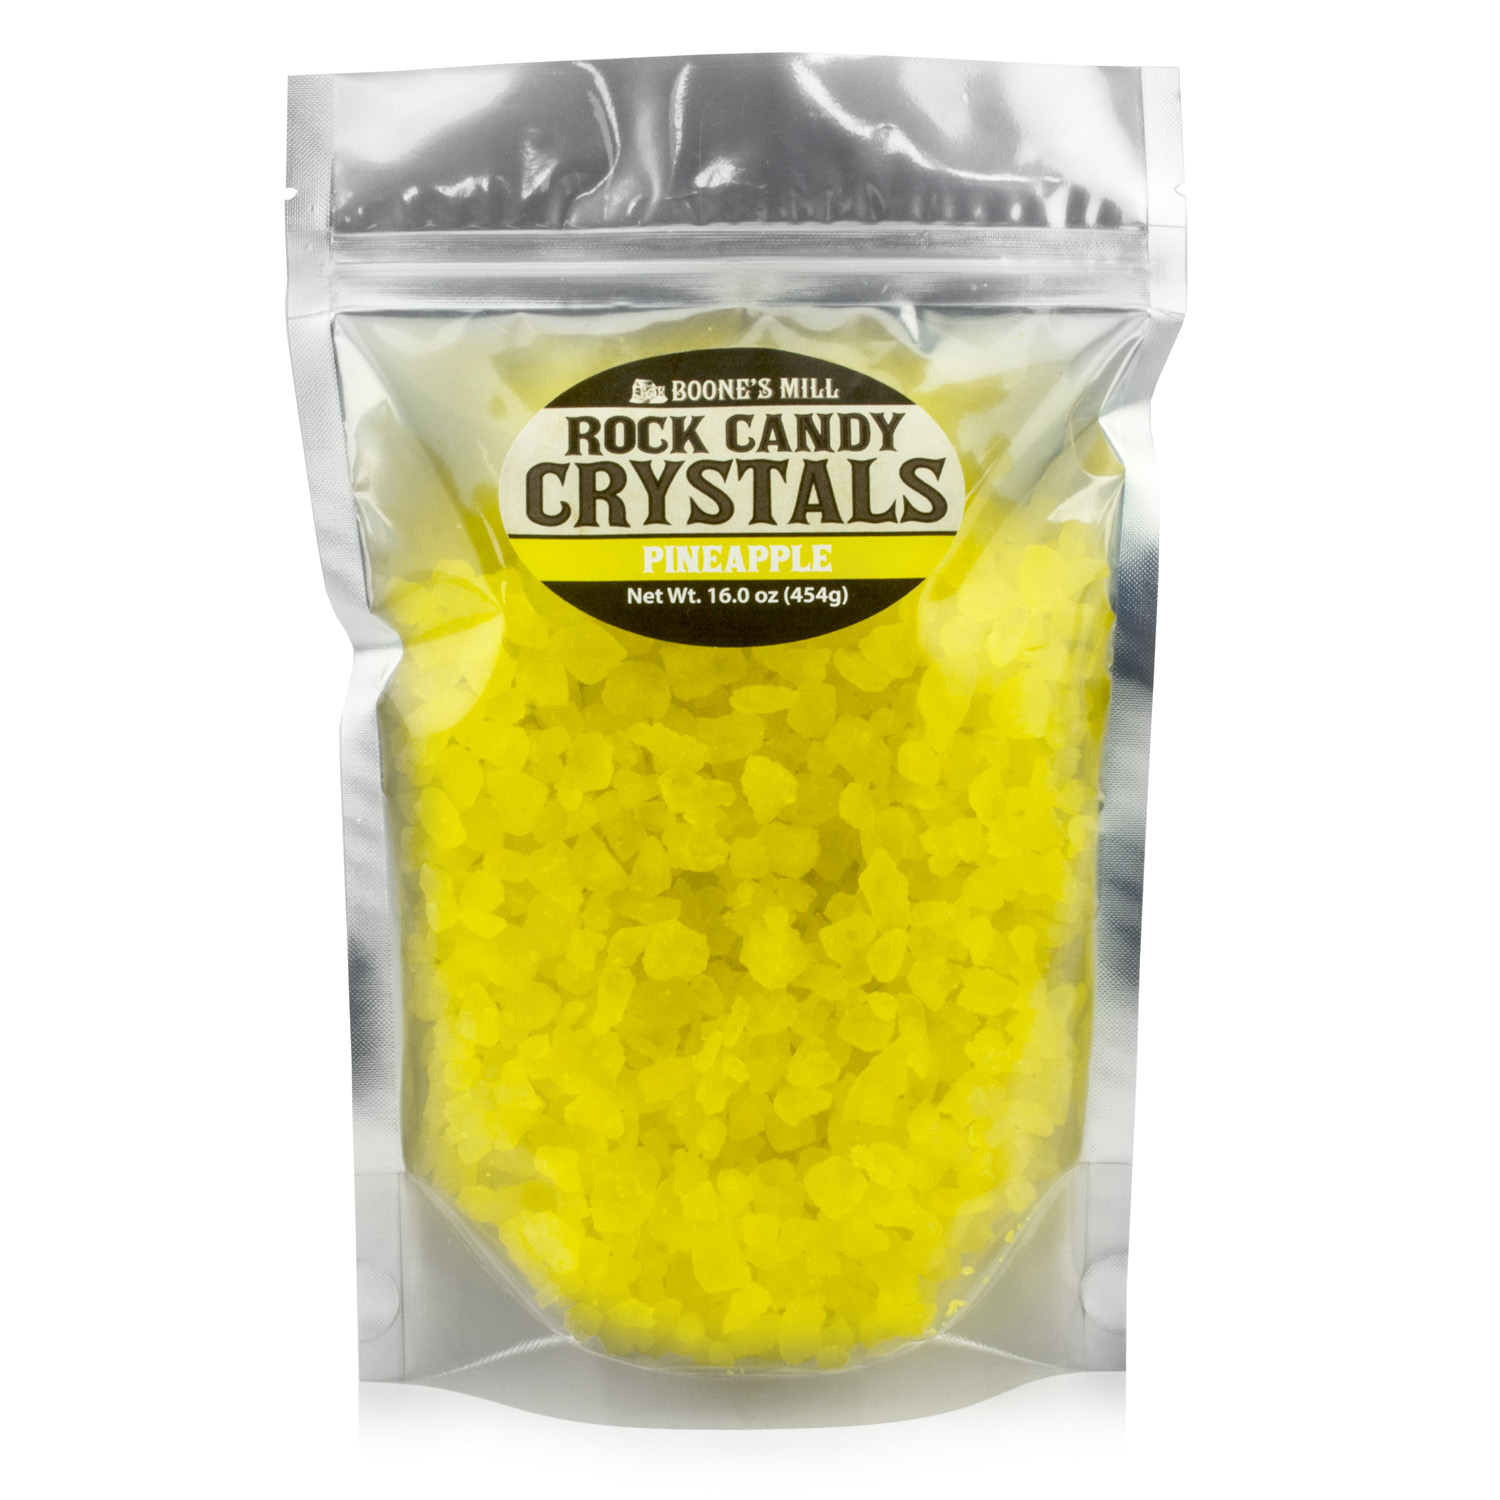 Yellow/Pineapple Rock Candy Crystals in 1 pound bag